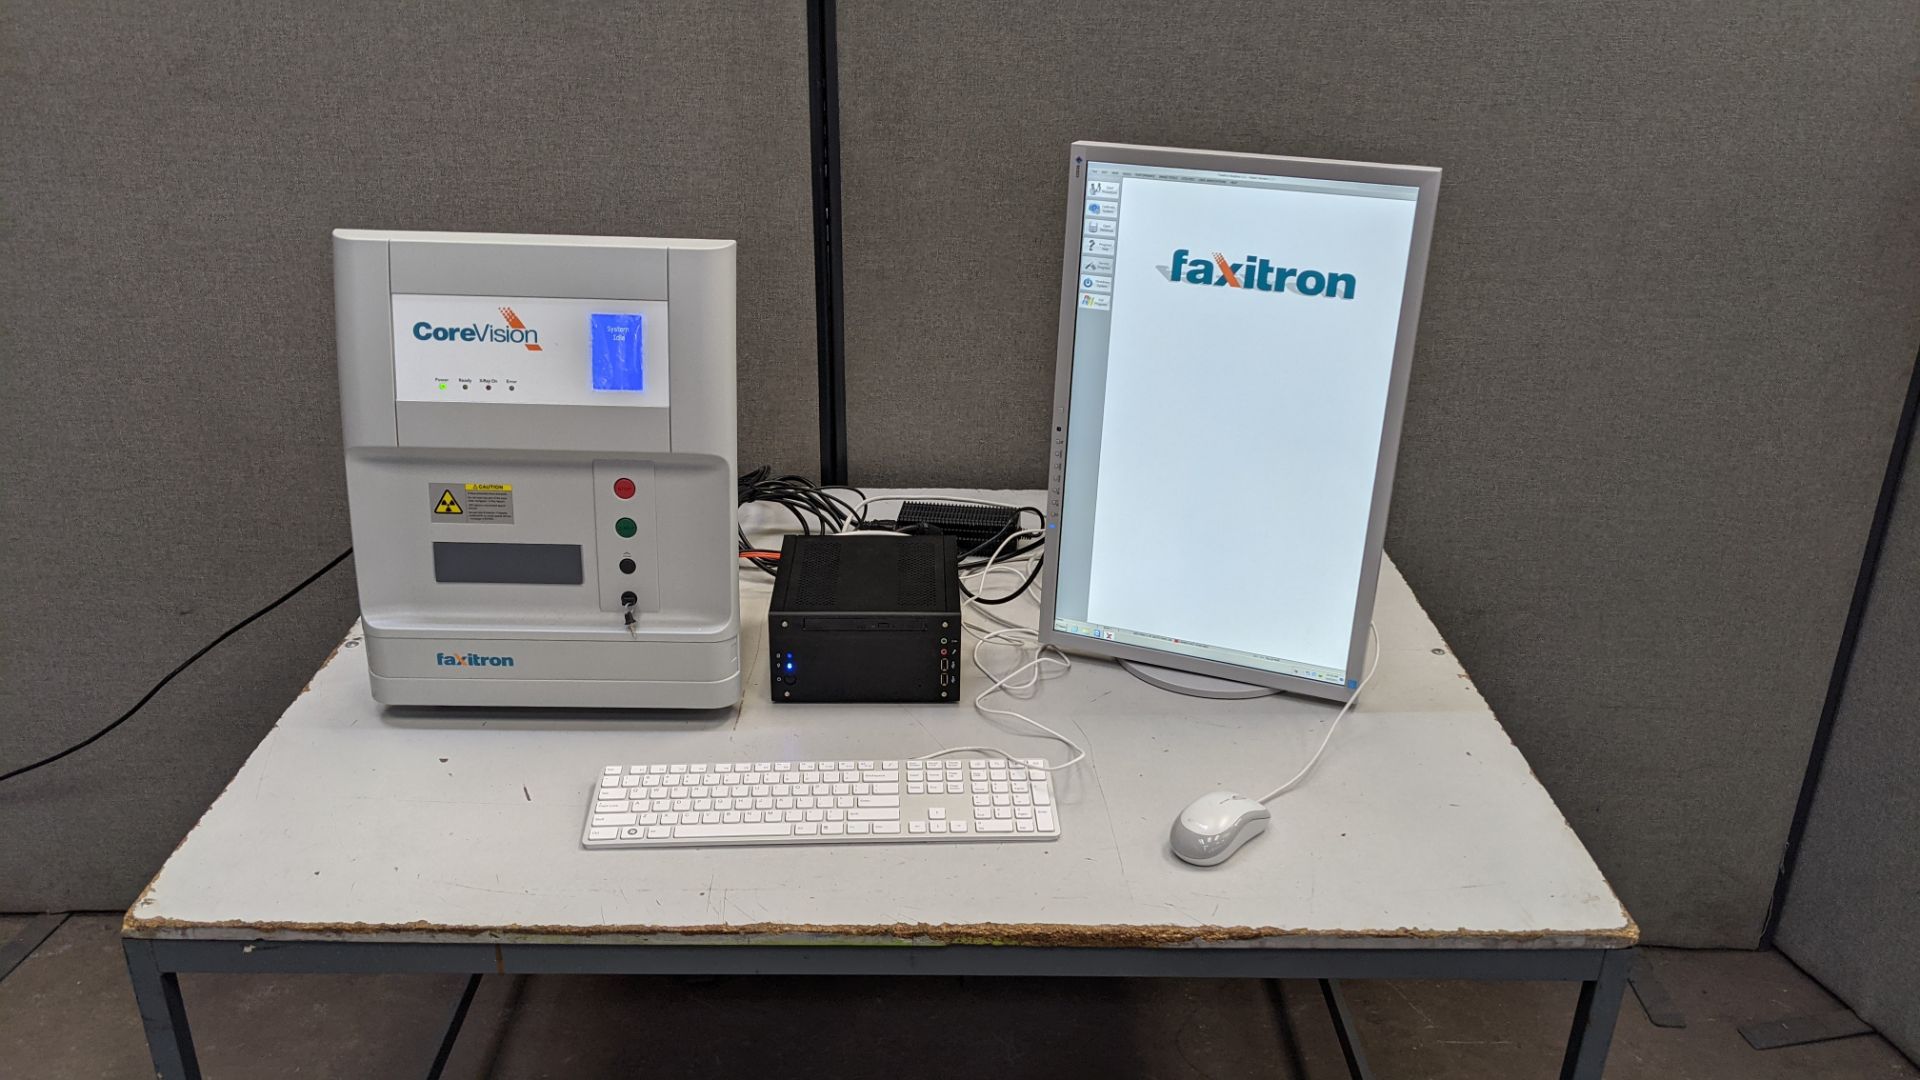 Faxitron CoreVision digital specimen system, purchased new in 2015.